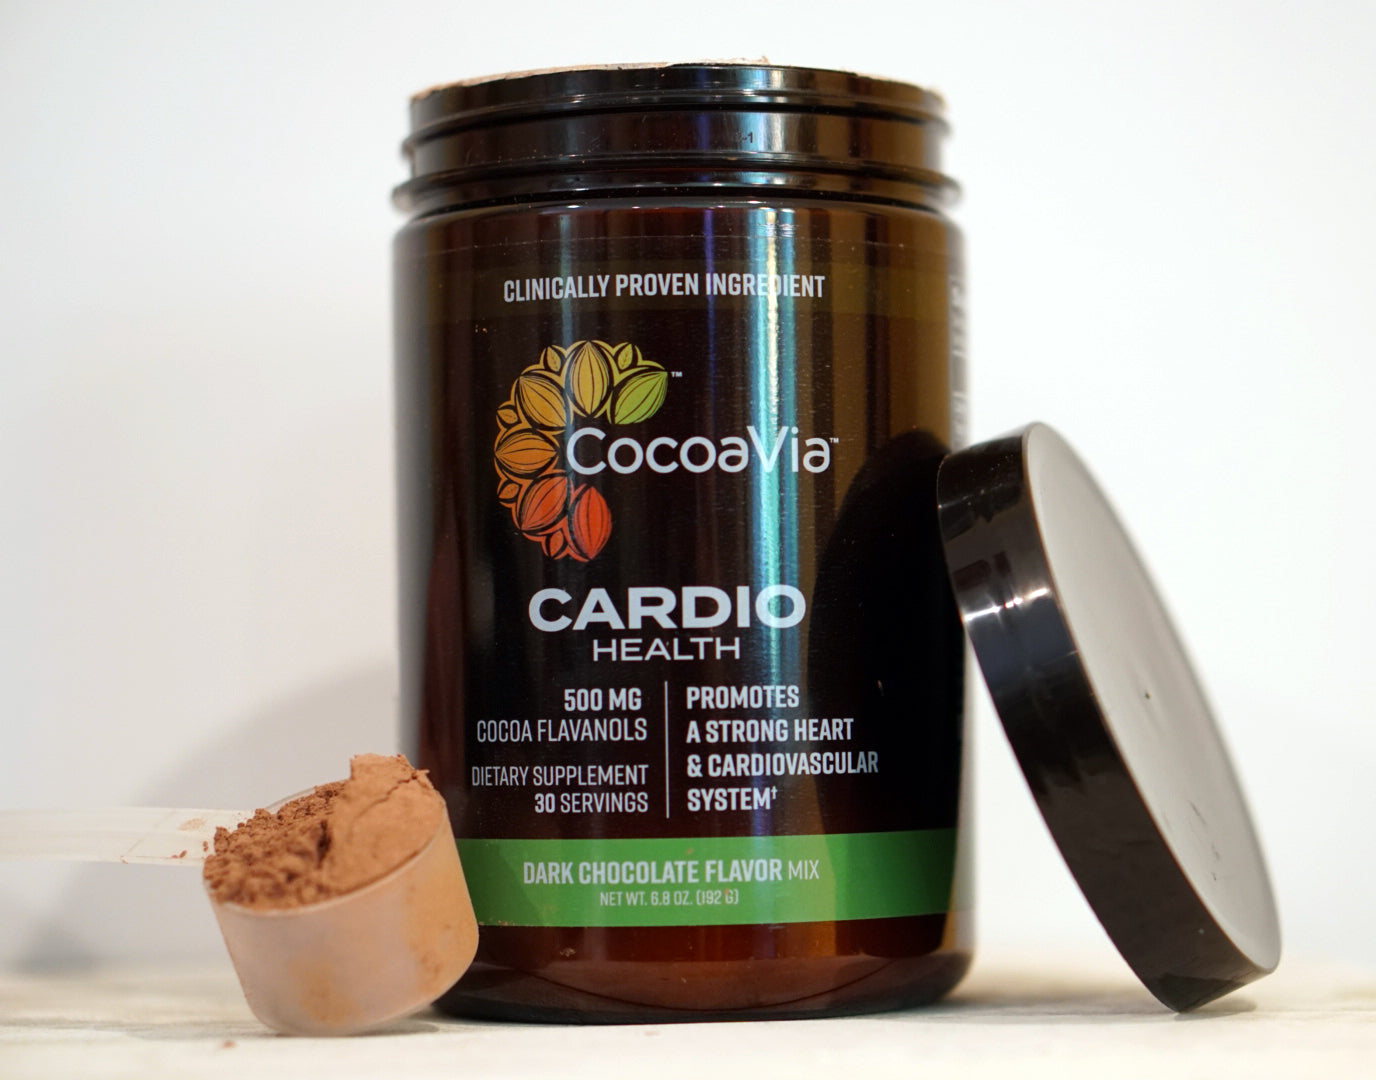 Cocoavia Cardio Health Powder Supplement with a scoop next to the tub